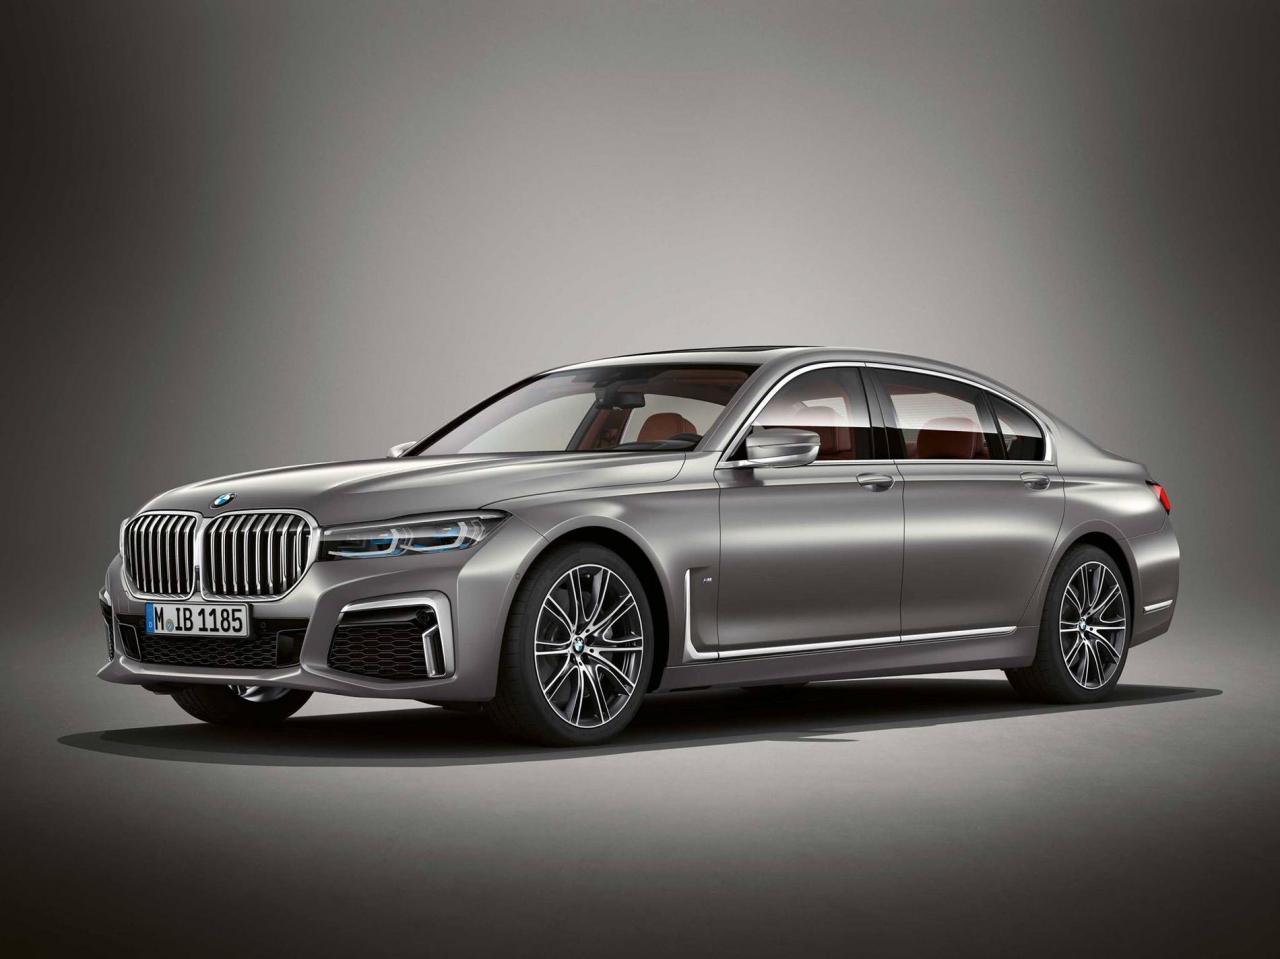 New BMW 7 Series Pricing to Start at 87,445